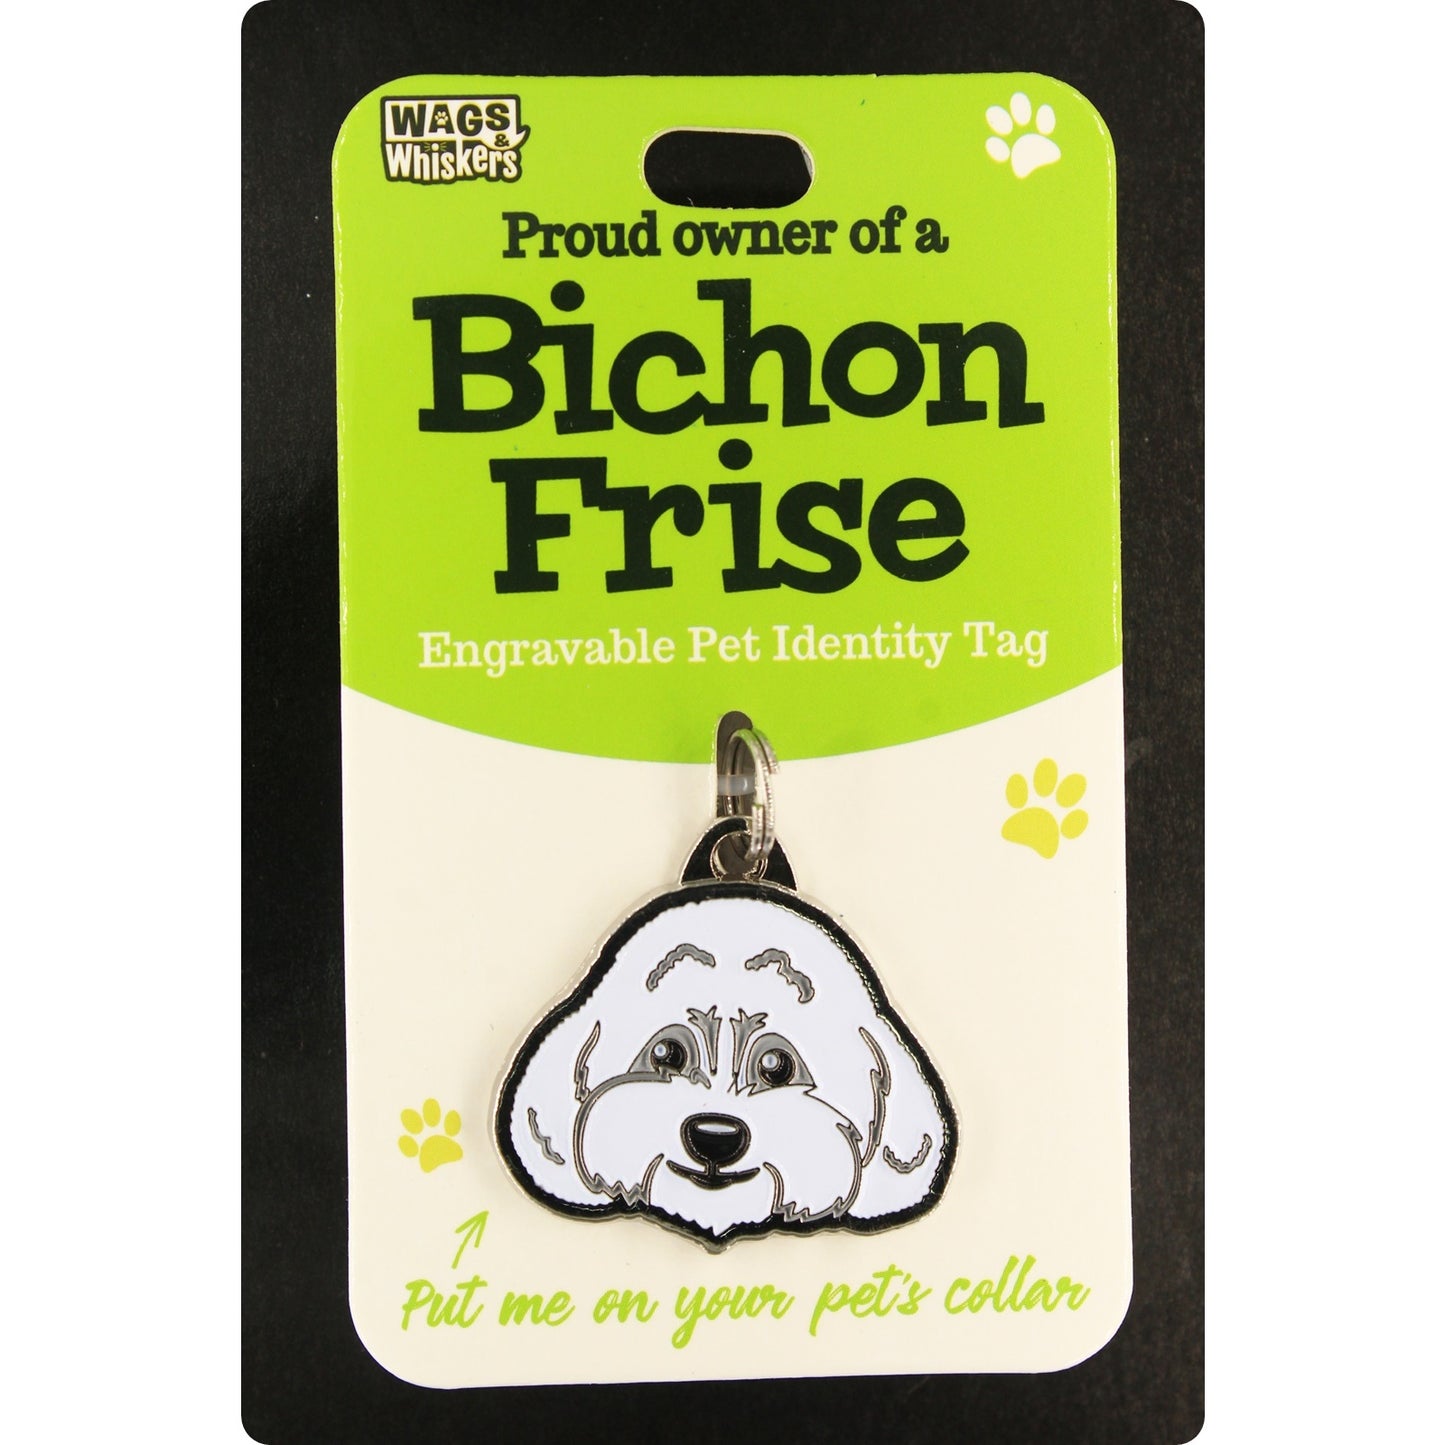 DESIRABLE GIFTS BICHON FRISE WAGS & WHISKERS DOG PET TAG I CAN NOT ENGRAVE THIS ITEM?